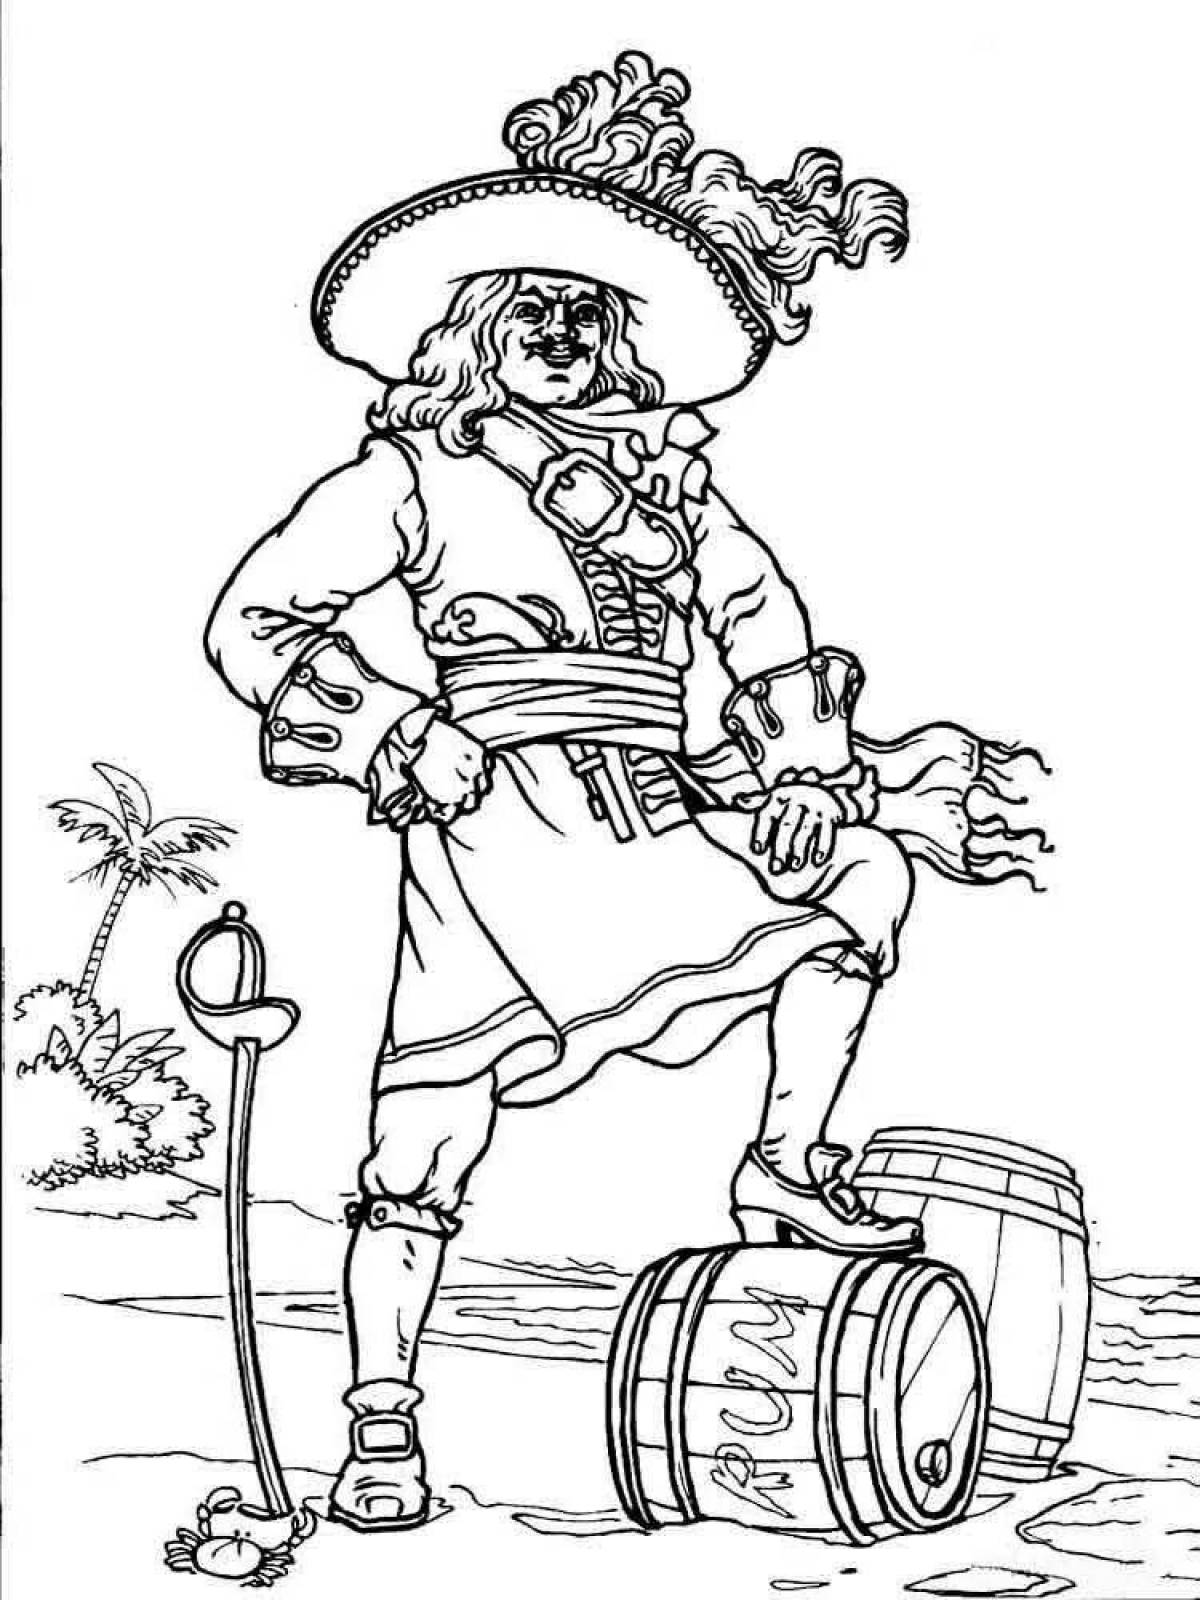 Glorious pirate coloring page